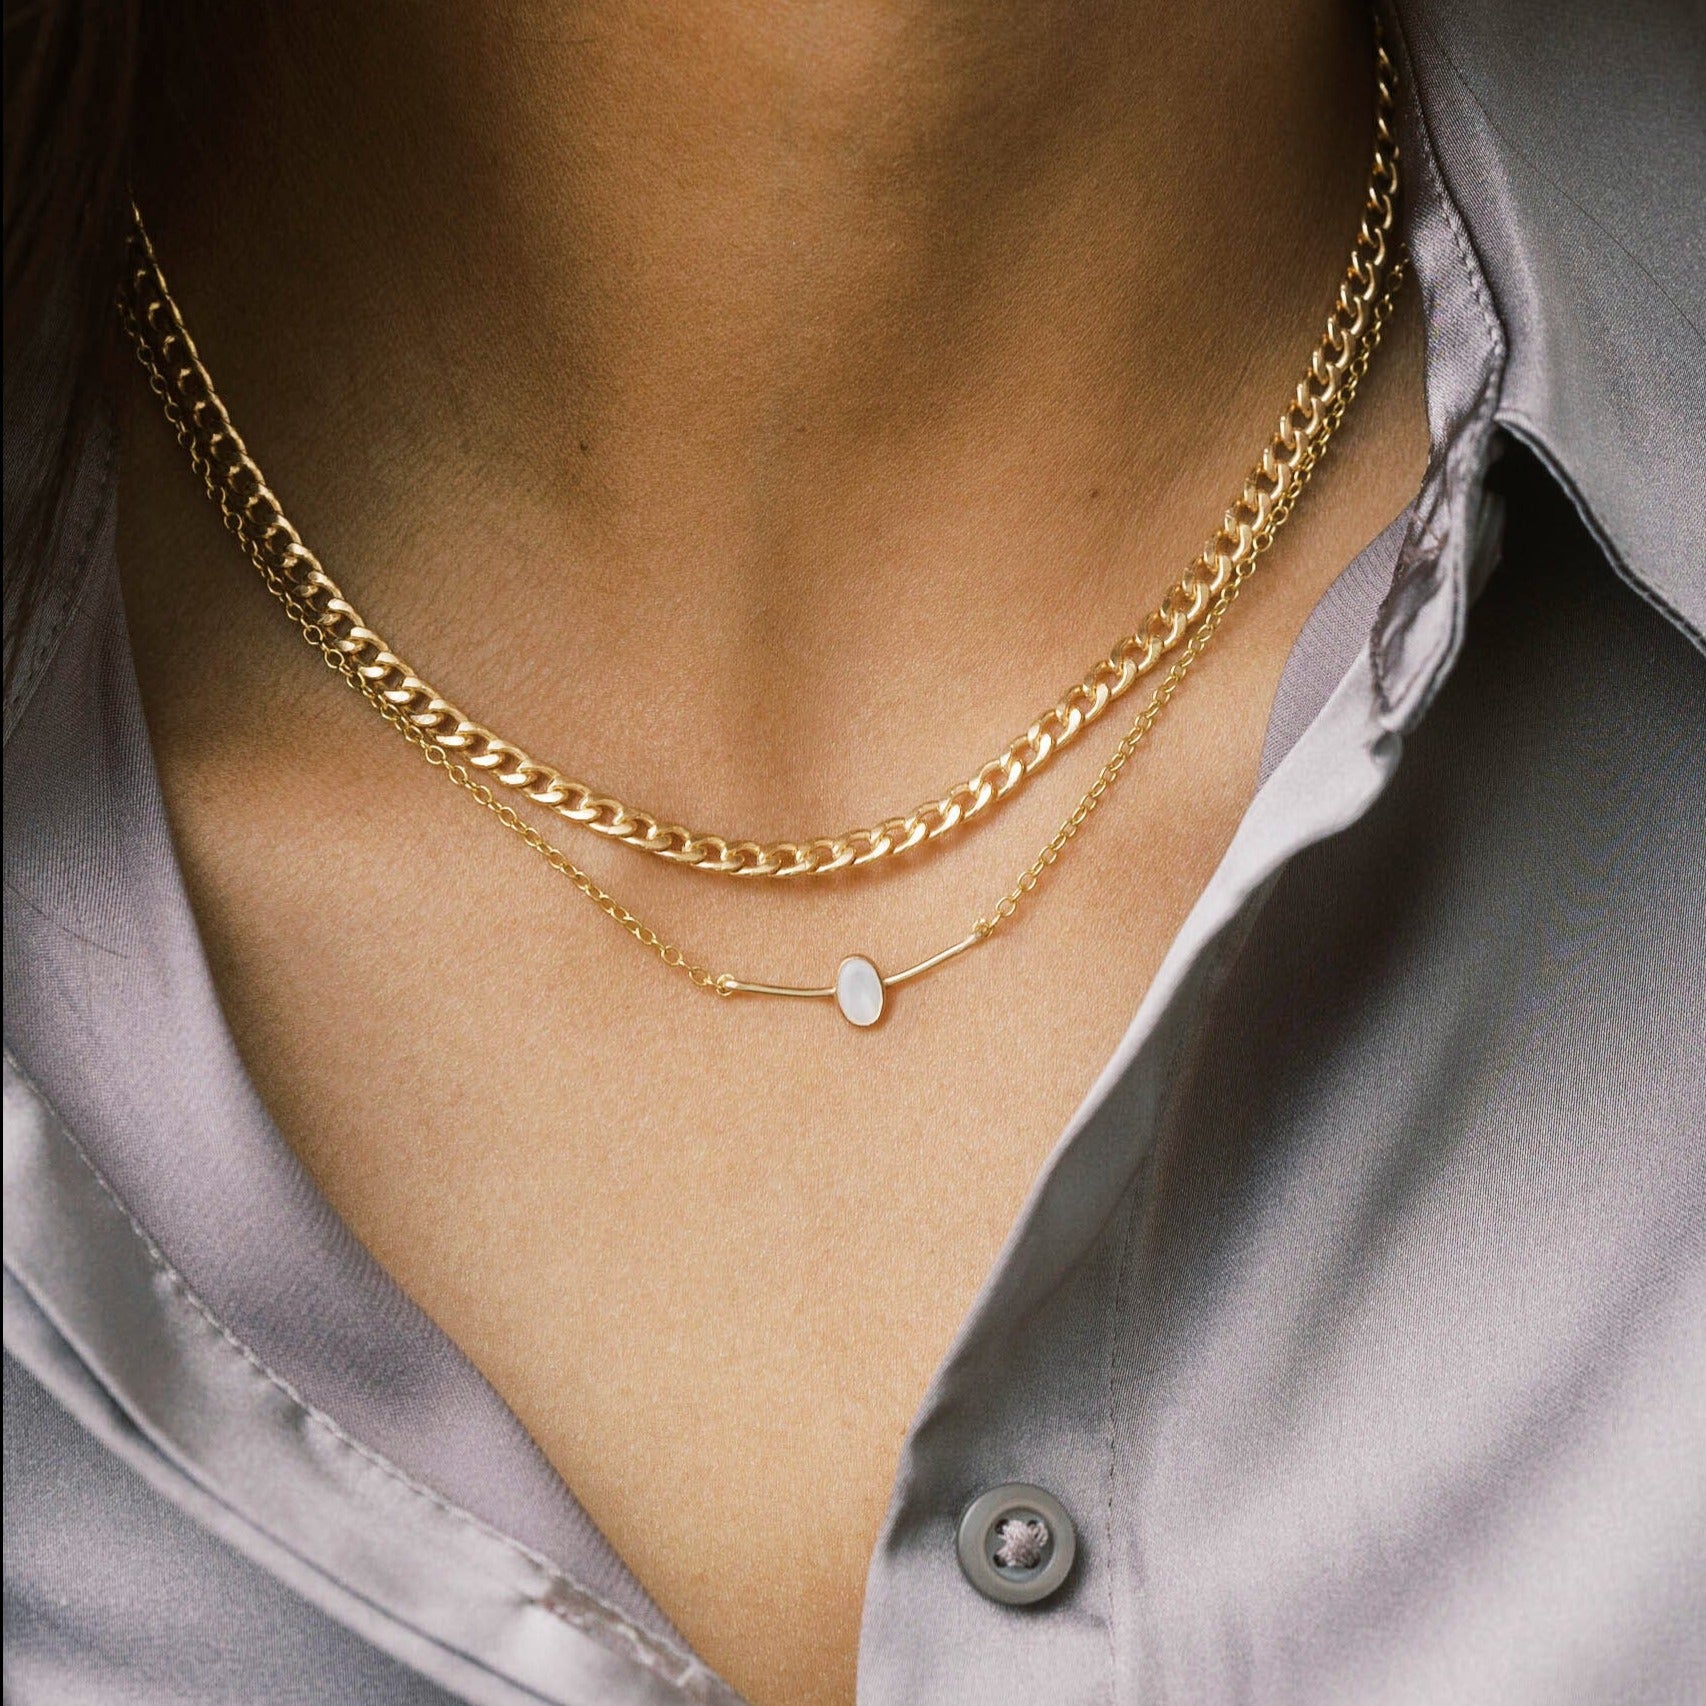 Two gold layering necklaces. One with a pearl set on a curved bar pendant. The other is a bold curb chain.